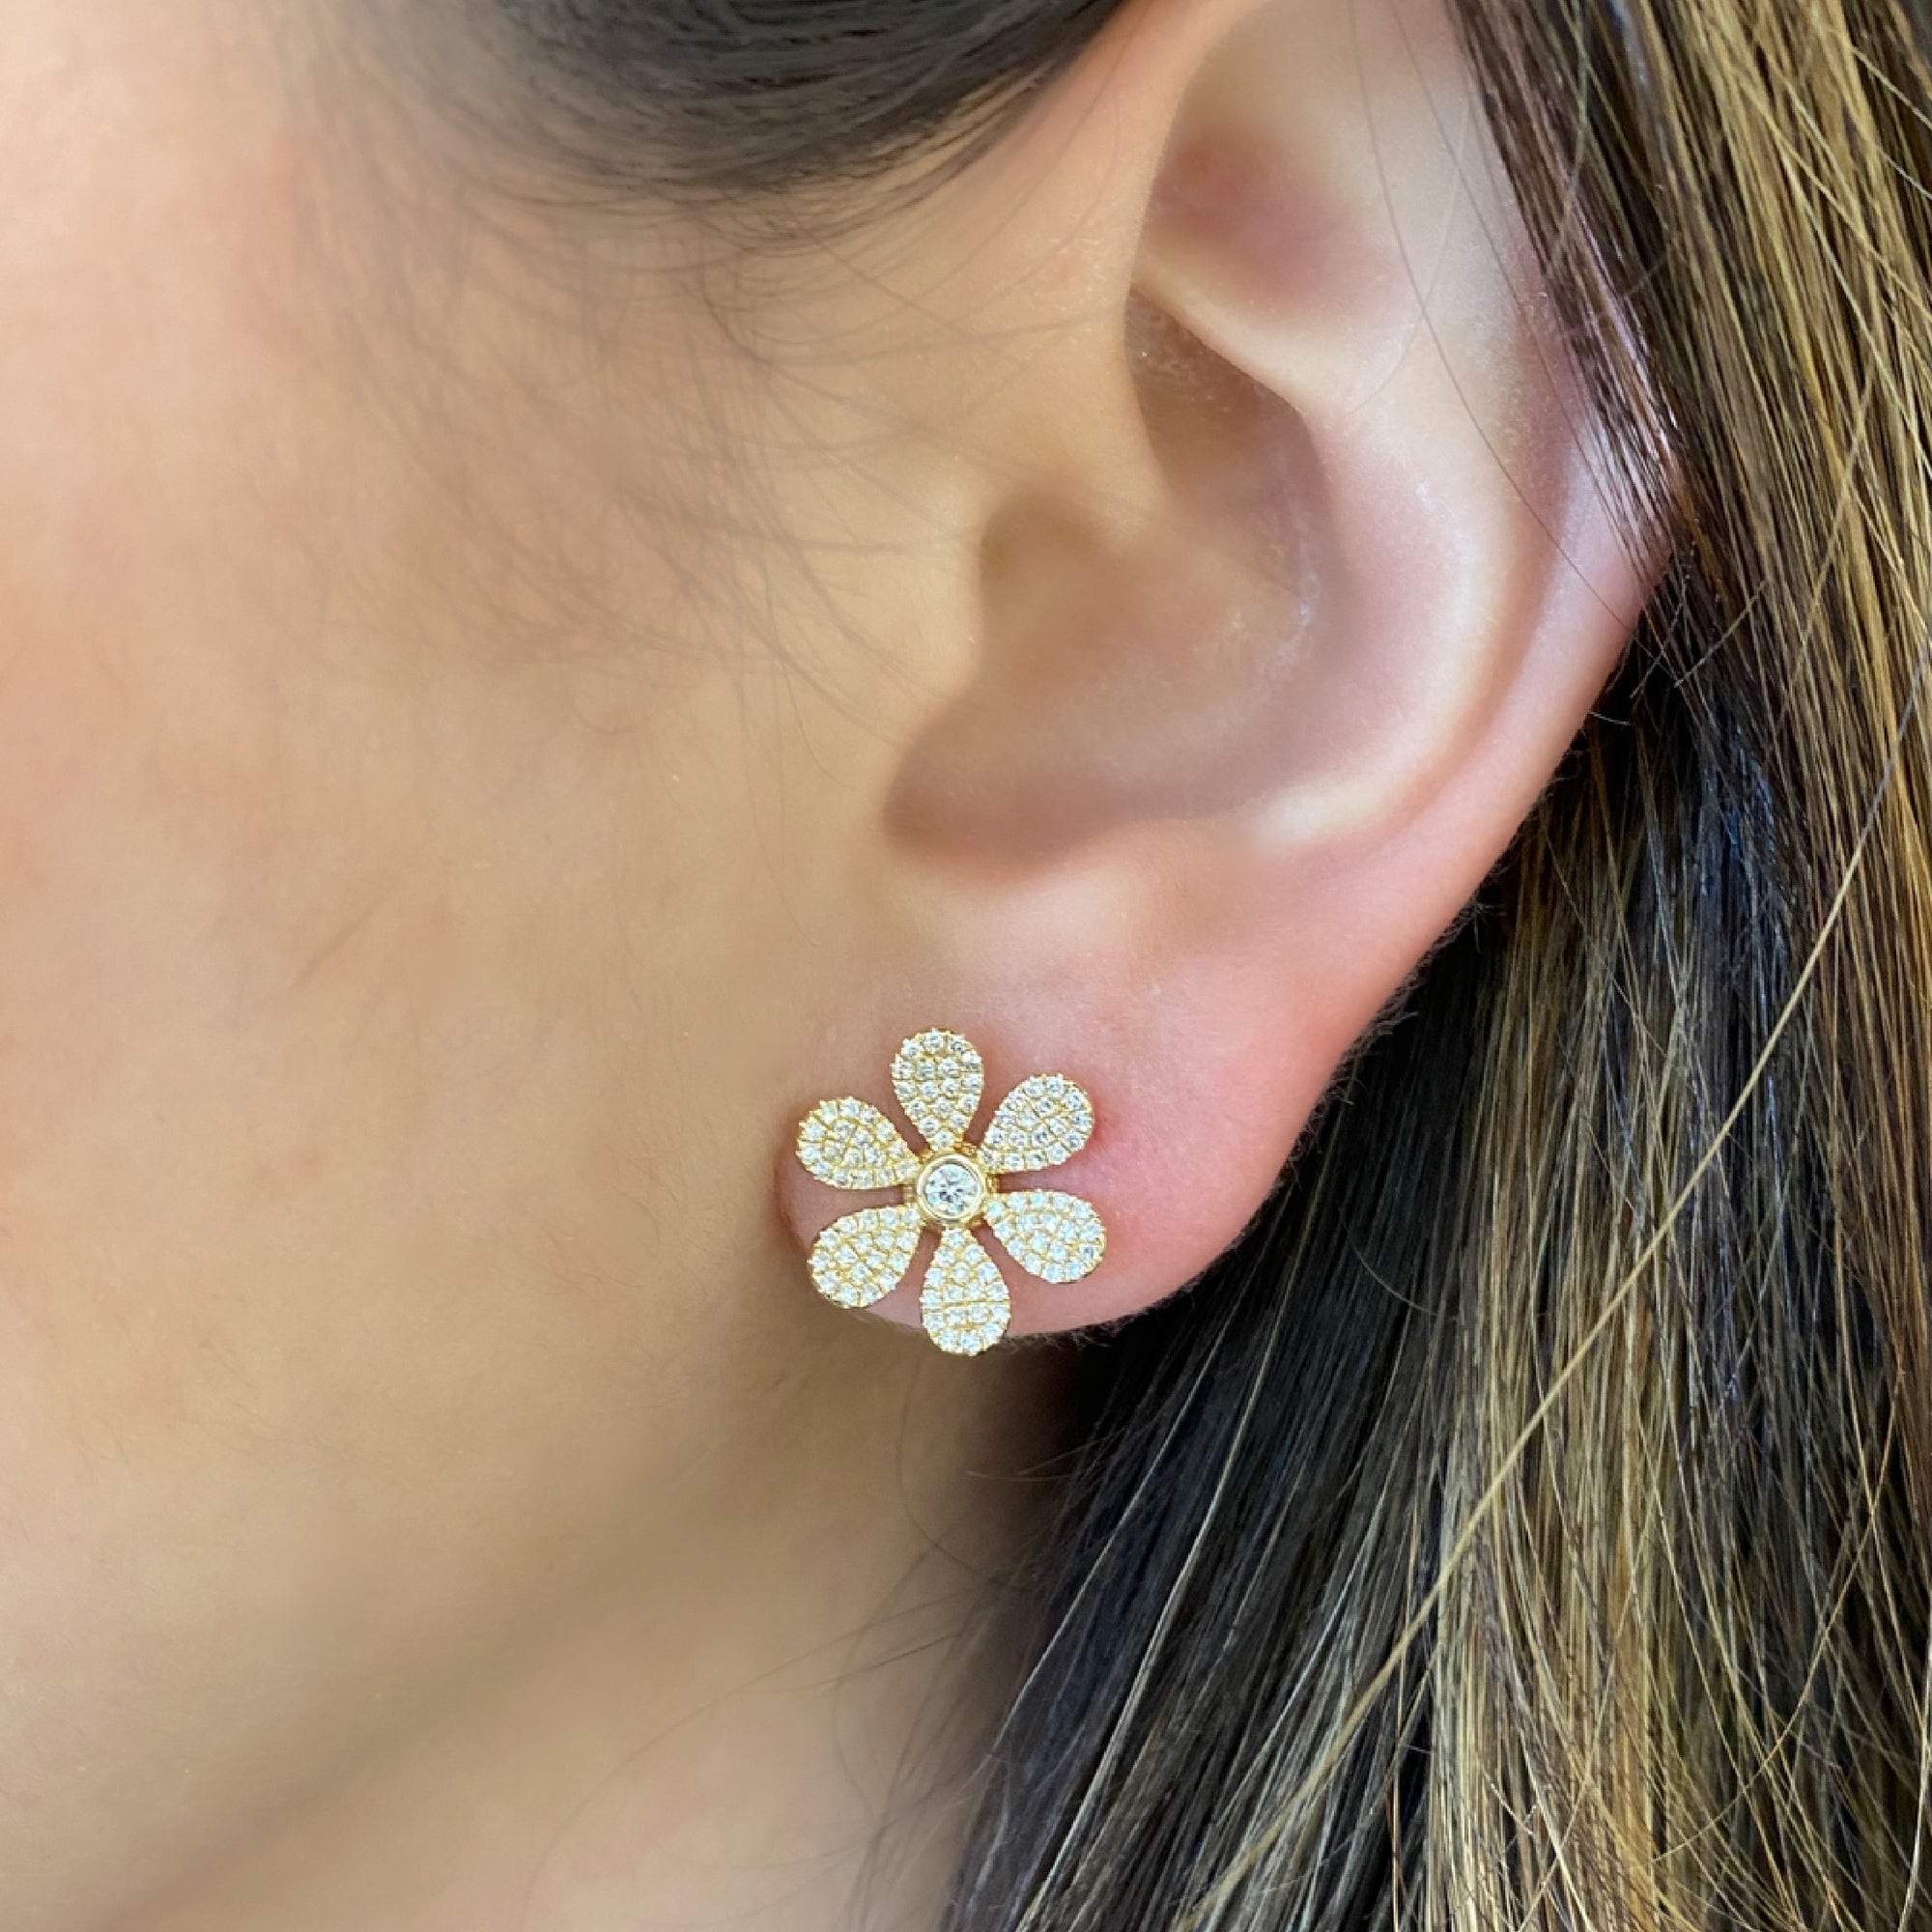 Diamond large daisy stud earring - 14K gold weighing 2.92 grams.  - 206 round diamonds totaling 0.60 carats.